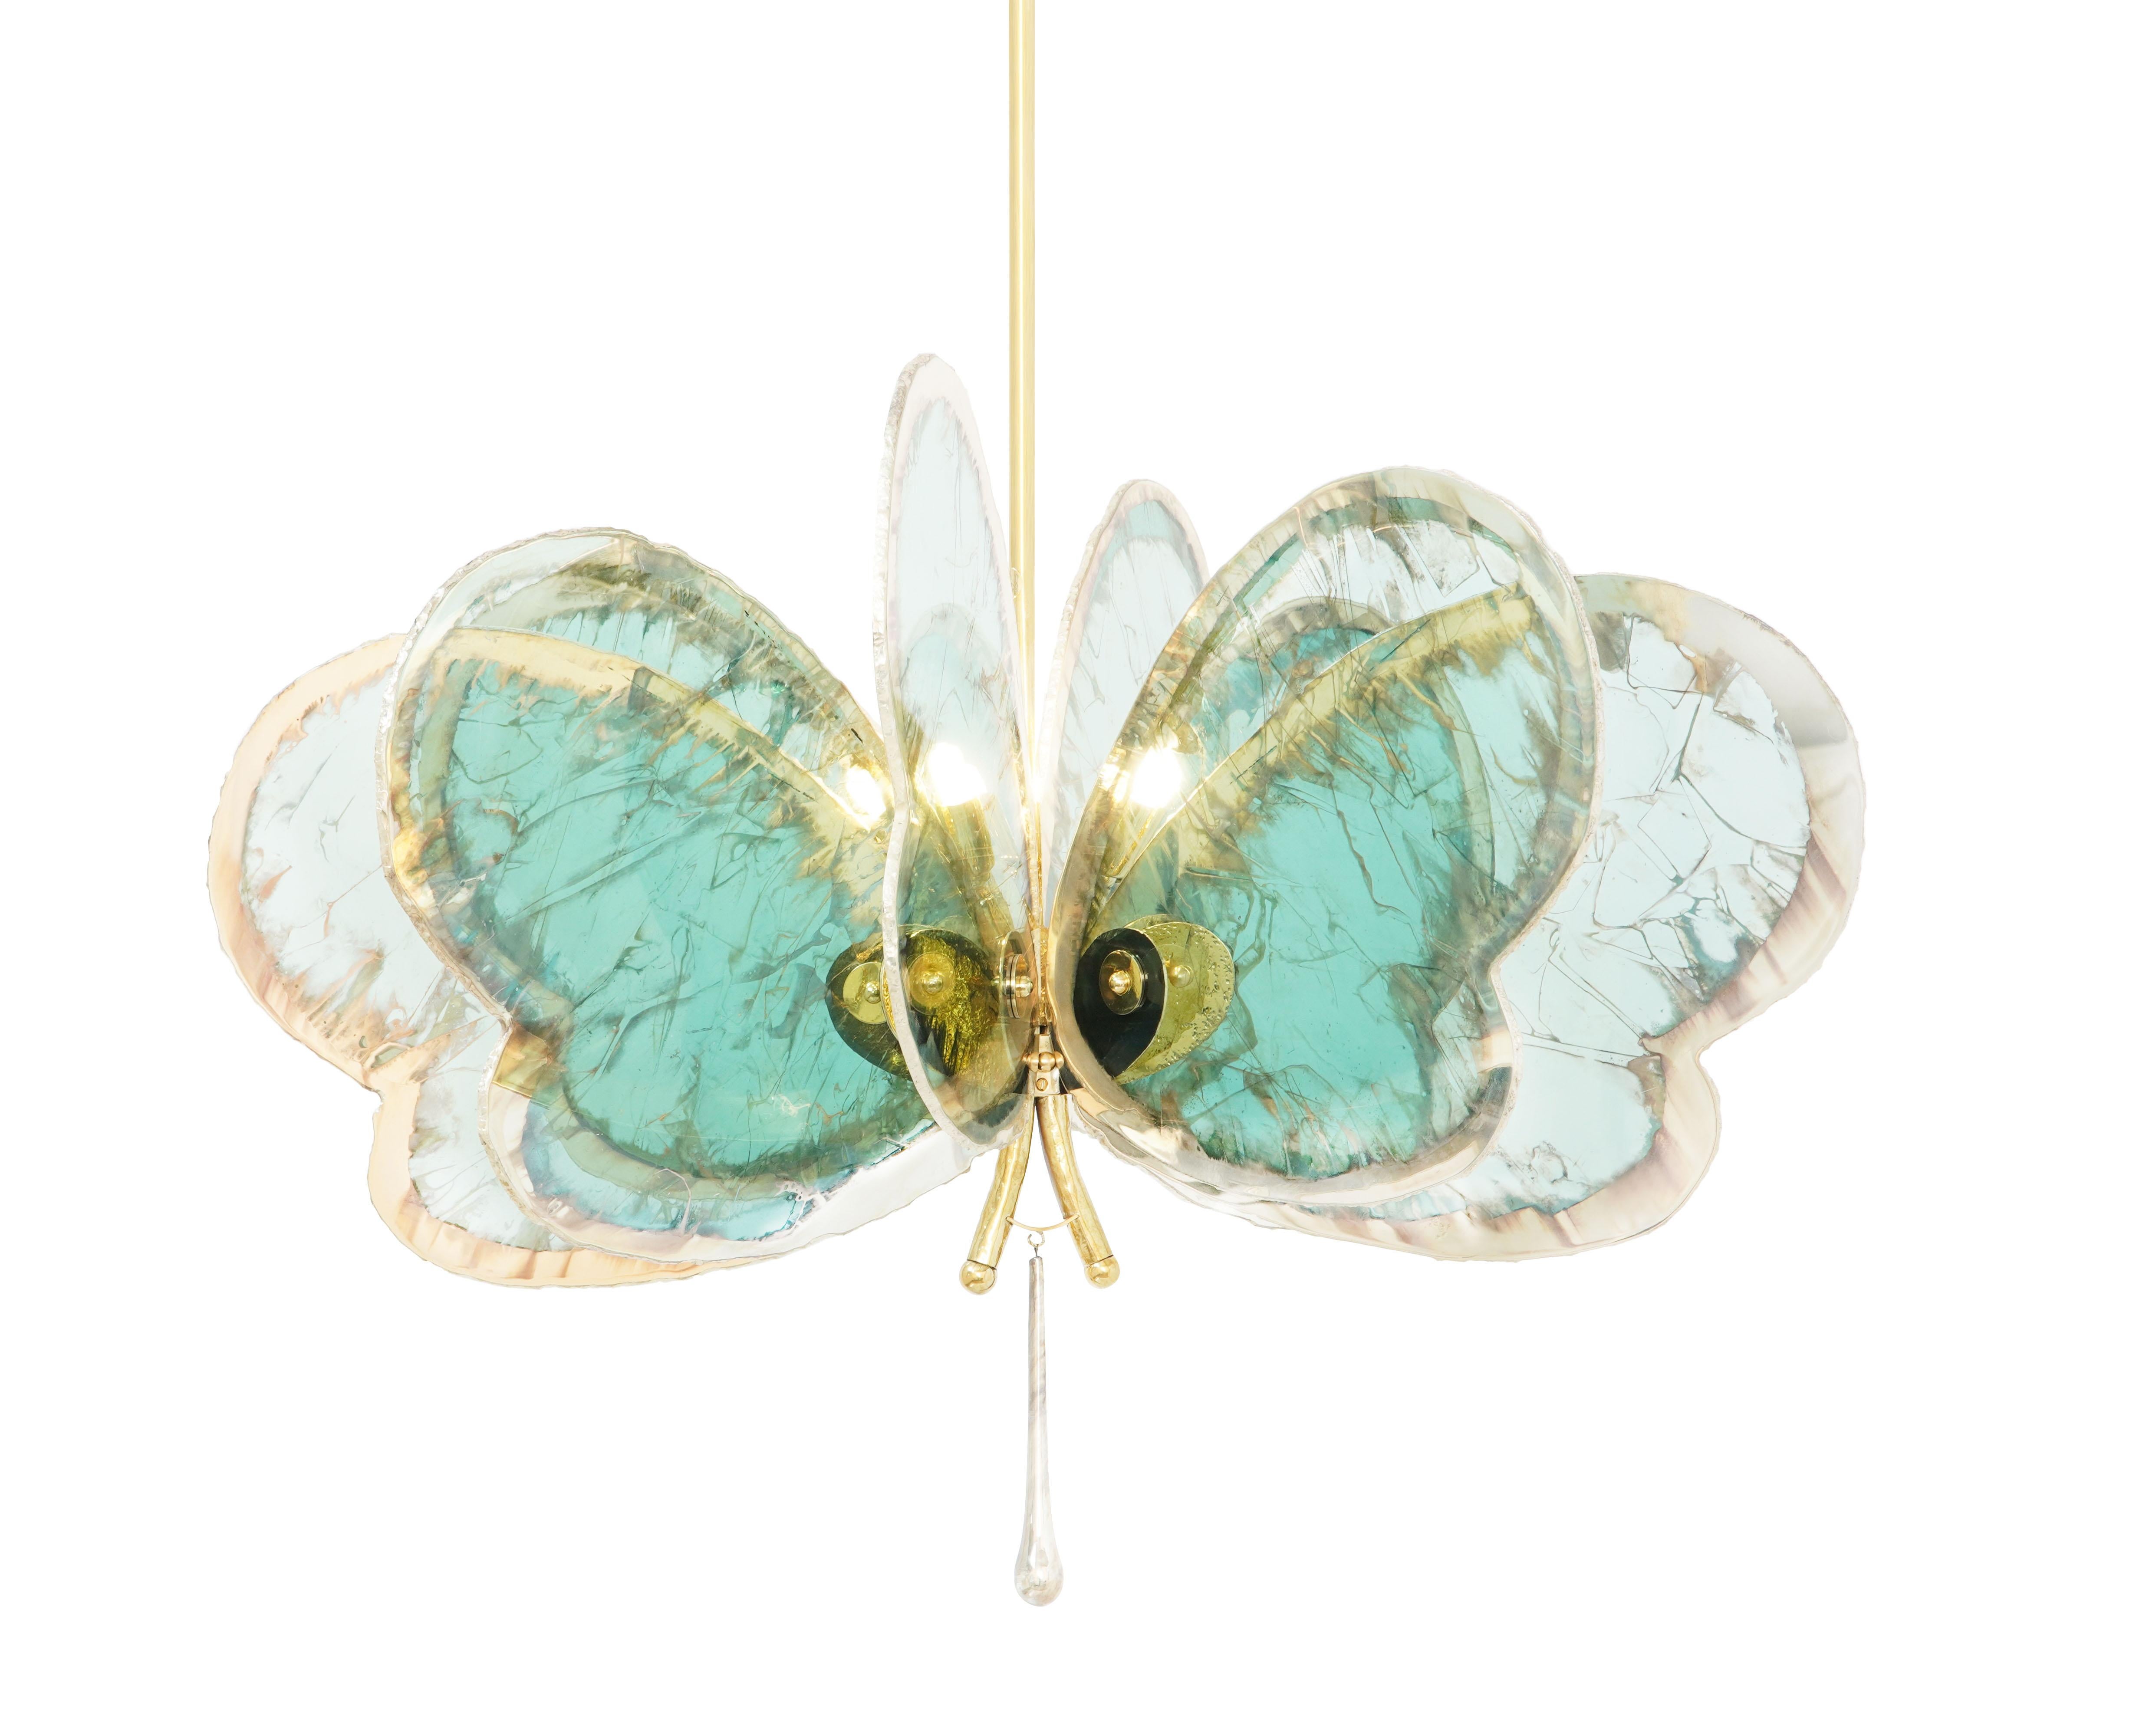 BIG BUTTERFLY jewel pendant lamp

Sabrina Landini for 20 years , pays homage to glass surfaces in her expression of silvered masterworks, the hallmark of each item in collection.

A symbol of joy, optimism and wonder, the Butterfly is a Sabrina